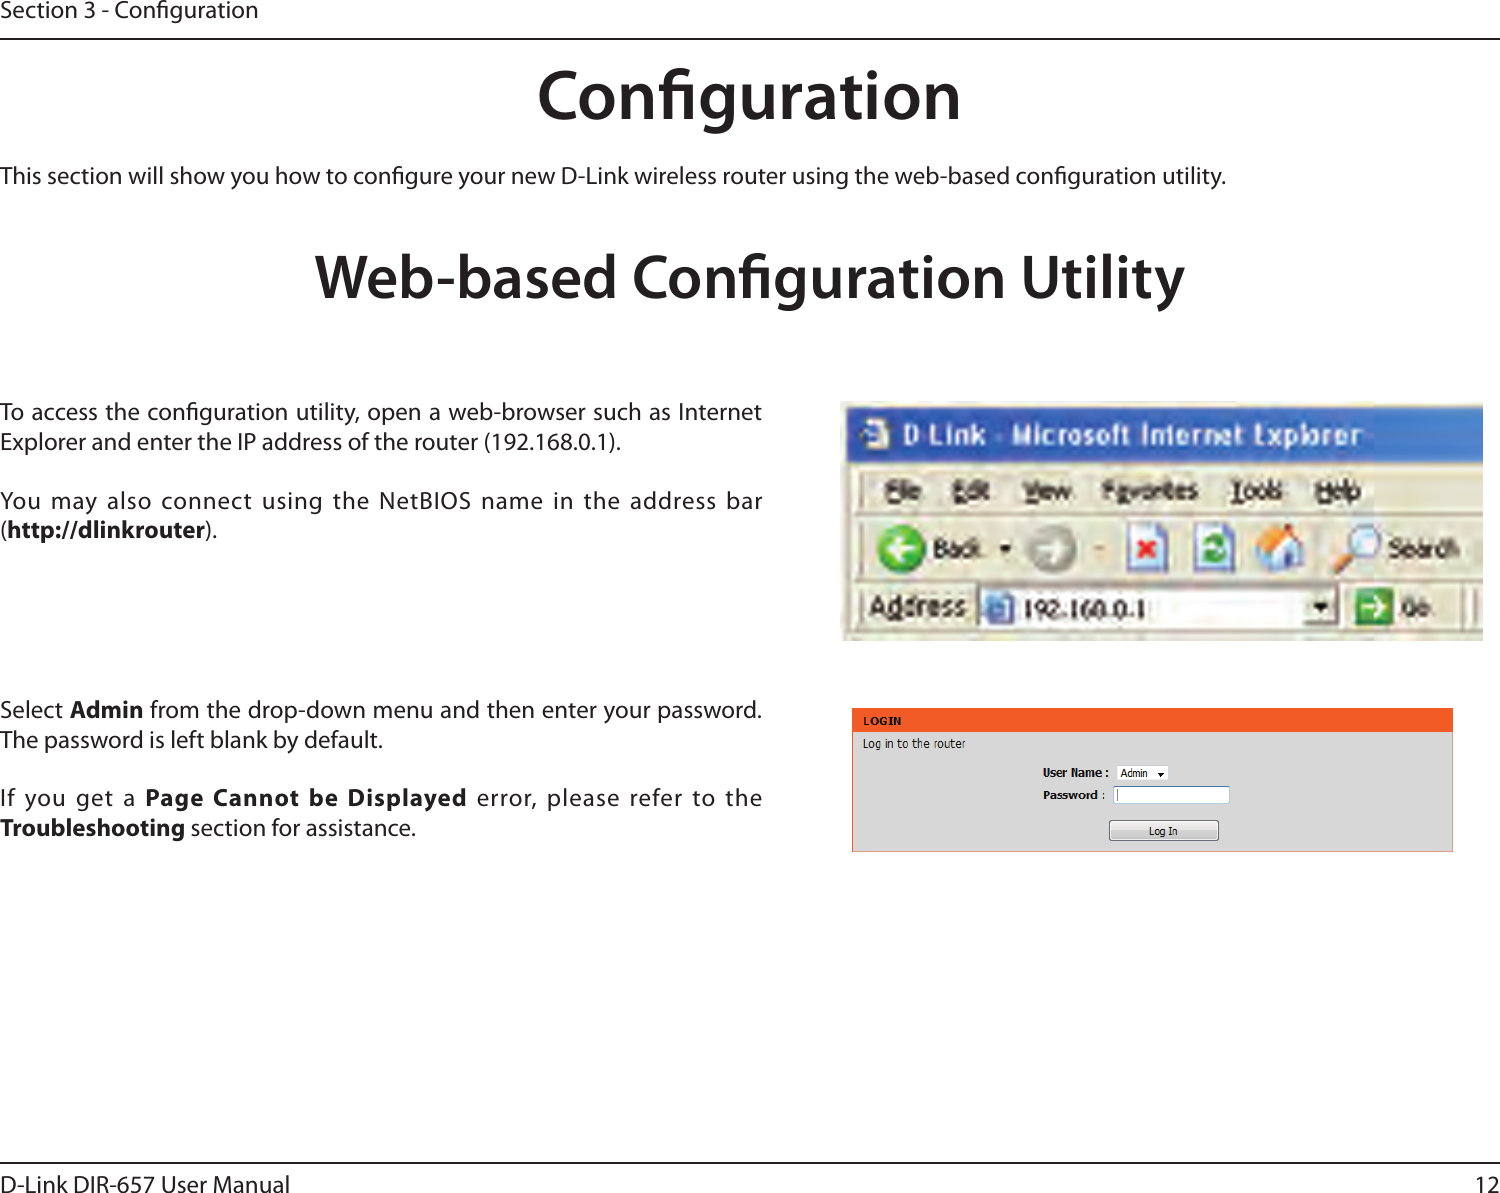 12D-Link DIR-657 User ManualSection 3 - CongurationCongurationThis section will show you how to congure your new D-Link wireless router using the web-based conguration utility.Web-based Conguration UtilityTo access the conguration utility, open a web-browser such as Internet Explorer and enter the IP address of the router (192.168.0.1).You  may also connect using  the NetBIOS name  in the address bar (http://dlinkrouter).Select Admin from the drop-down menu and then enter your password. The password is left blank by default.If  you  get  a  Page  Cannot  be  Displayed  error,  please  refer  to  the Troubleshooting section for assistance.